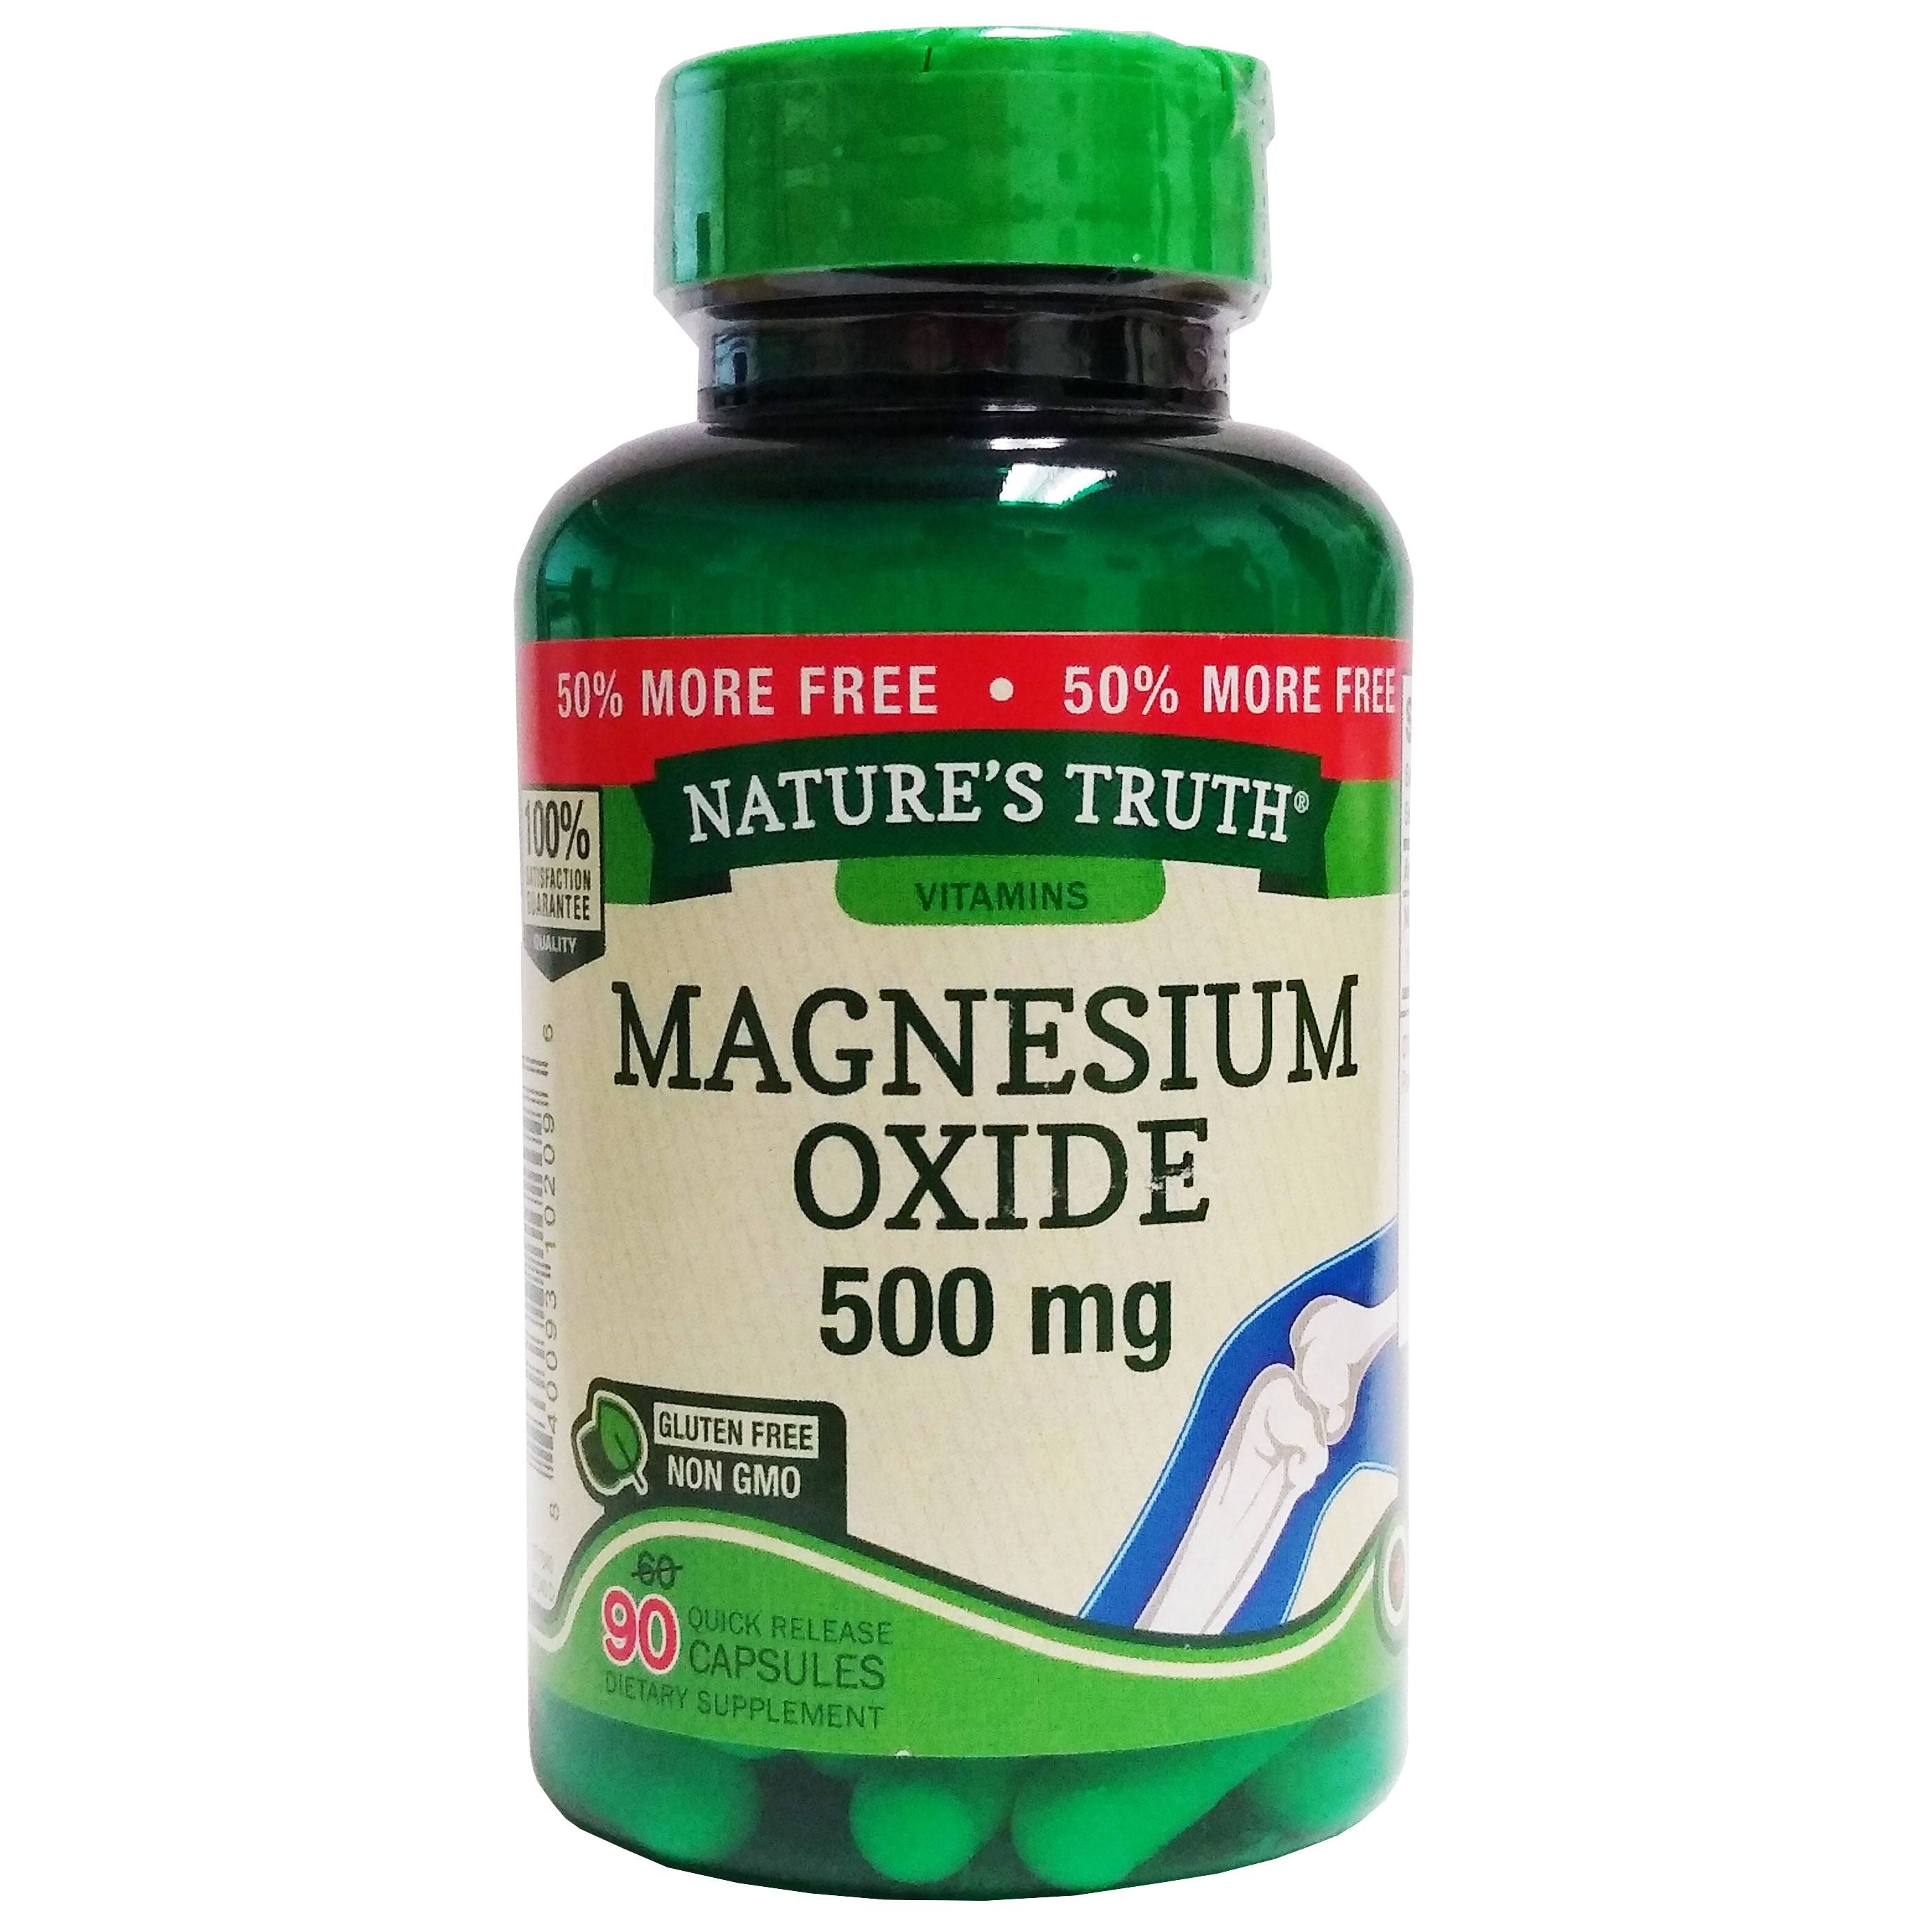 Nature's Truth Magnesium Oxide Supplement - 500mg, 90 Capsules